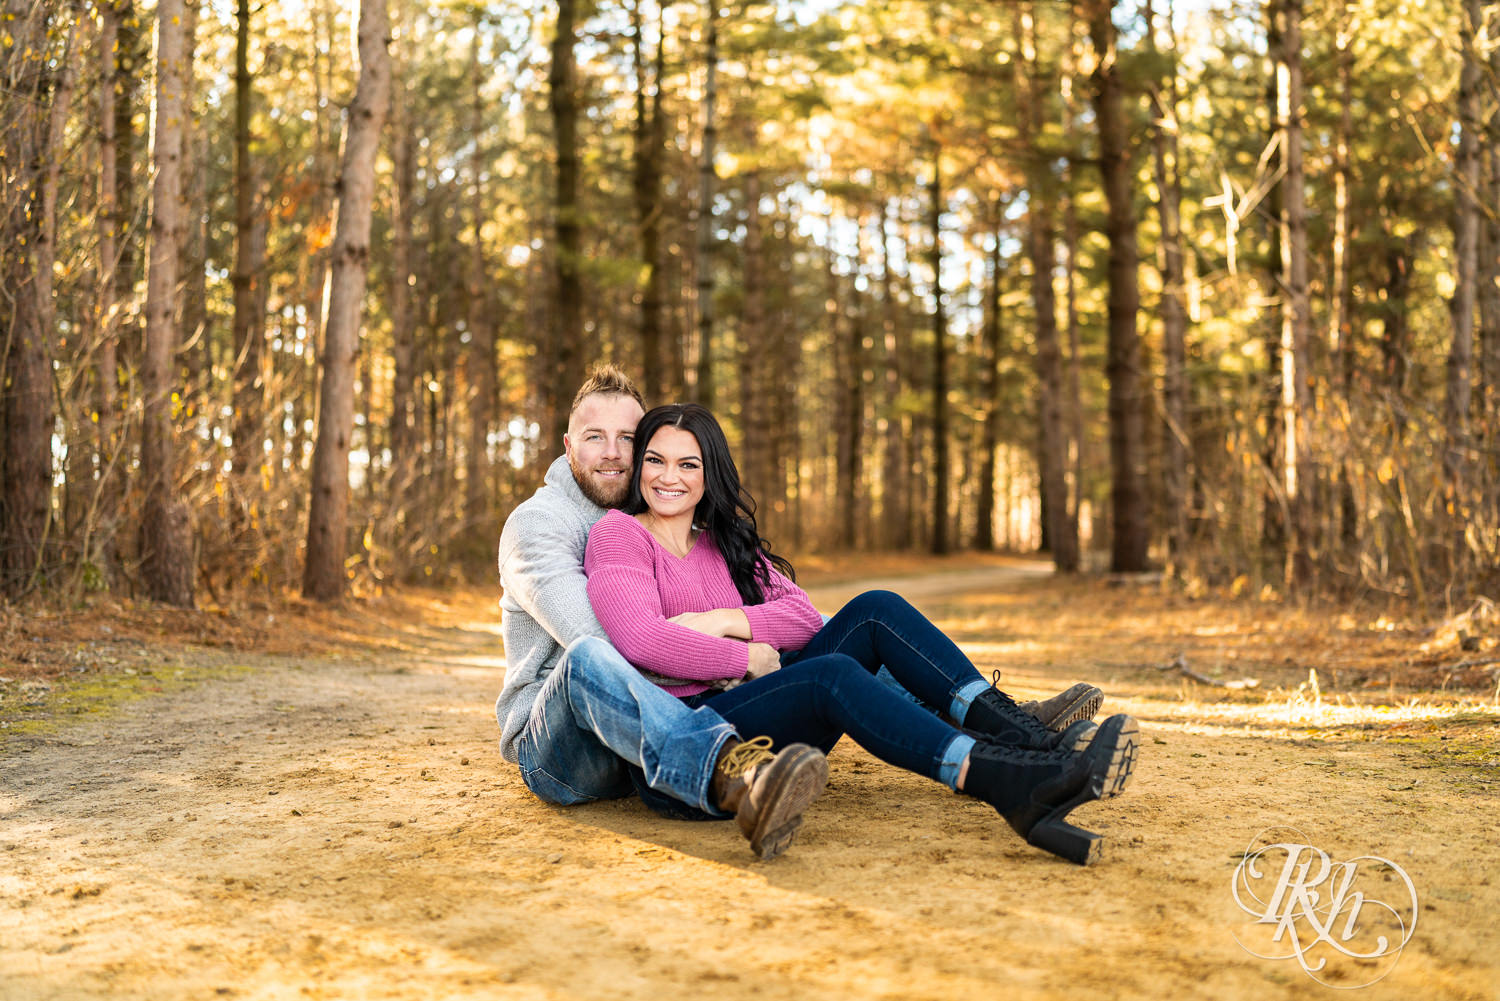 Man in sweater and jeans and woman in pink sweater and jeans smile in woods at Lebanon Hills Regional Park in Eagan, Minnesota.